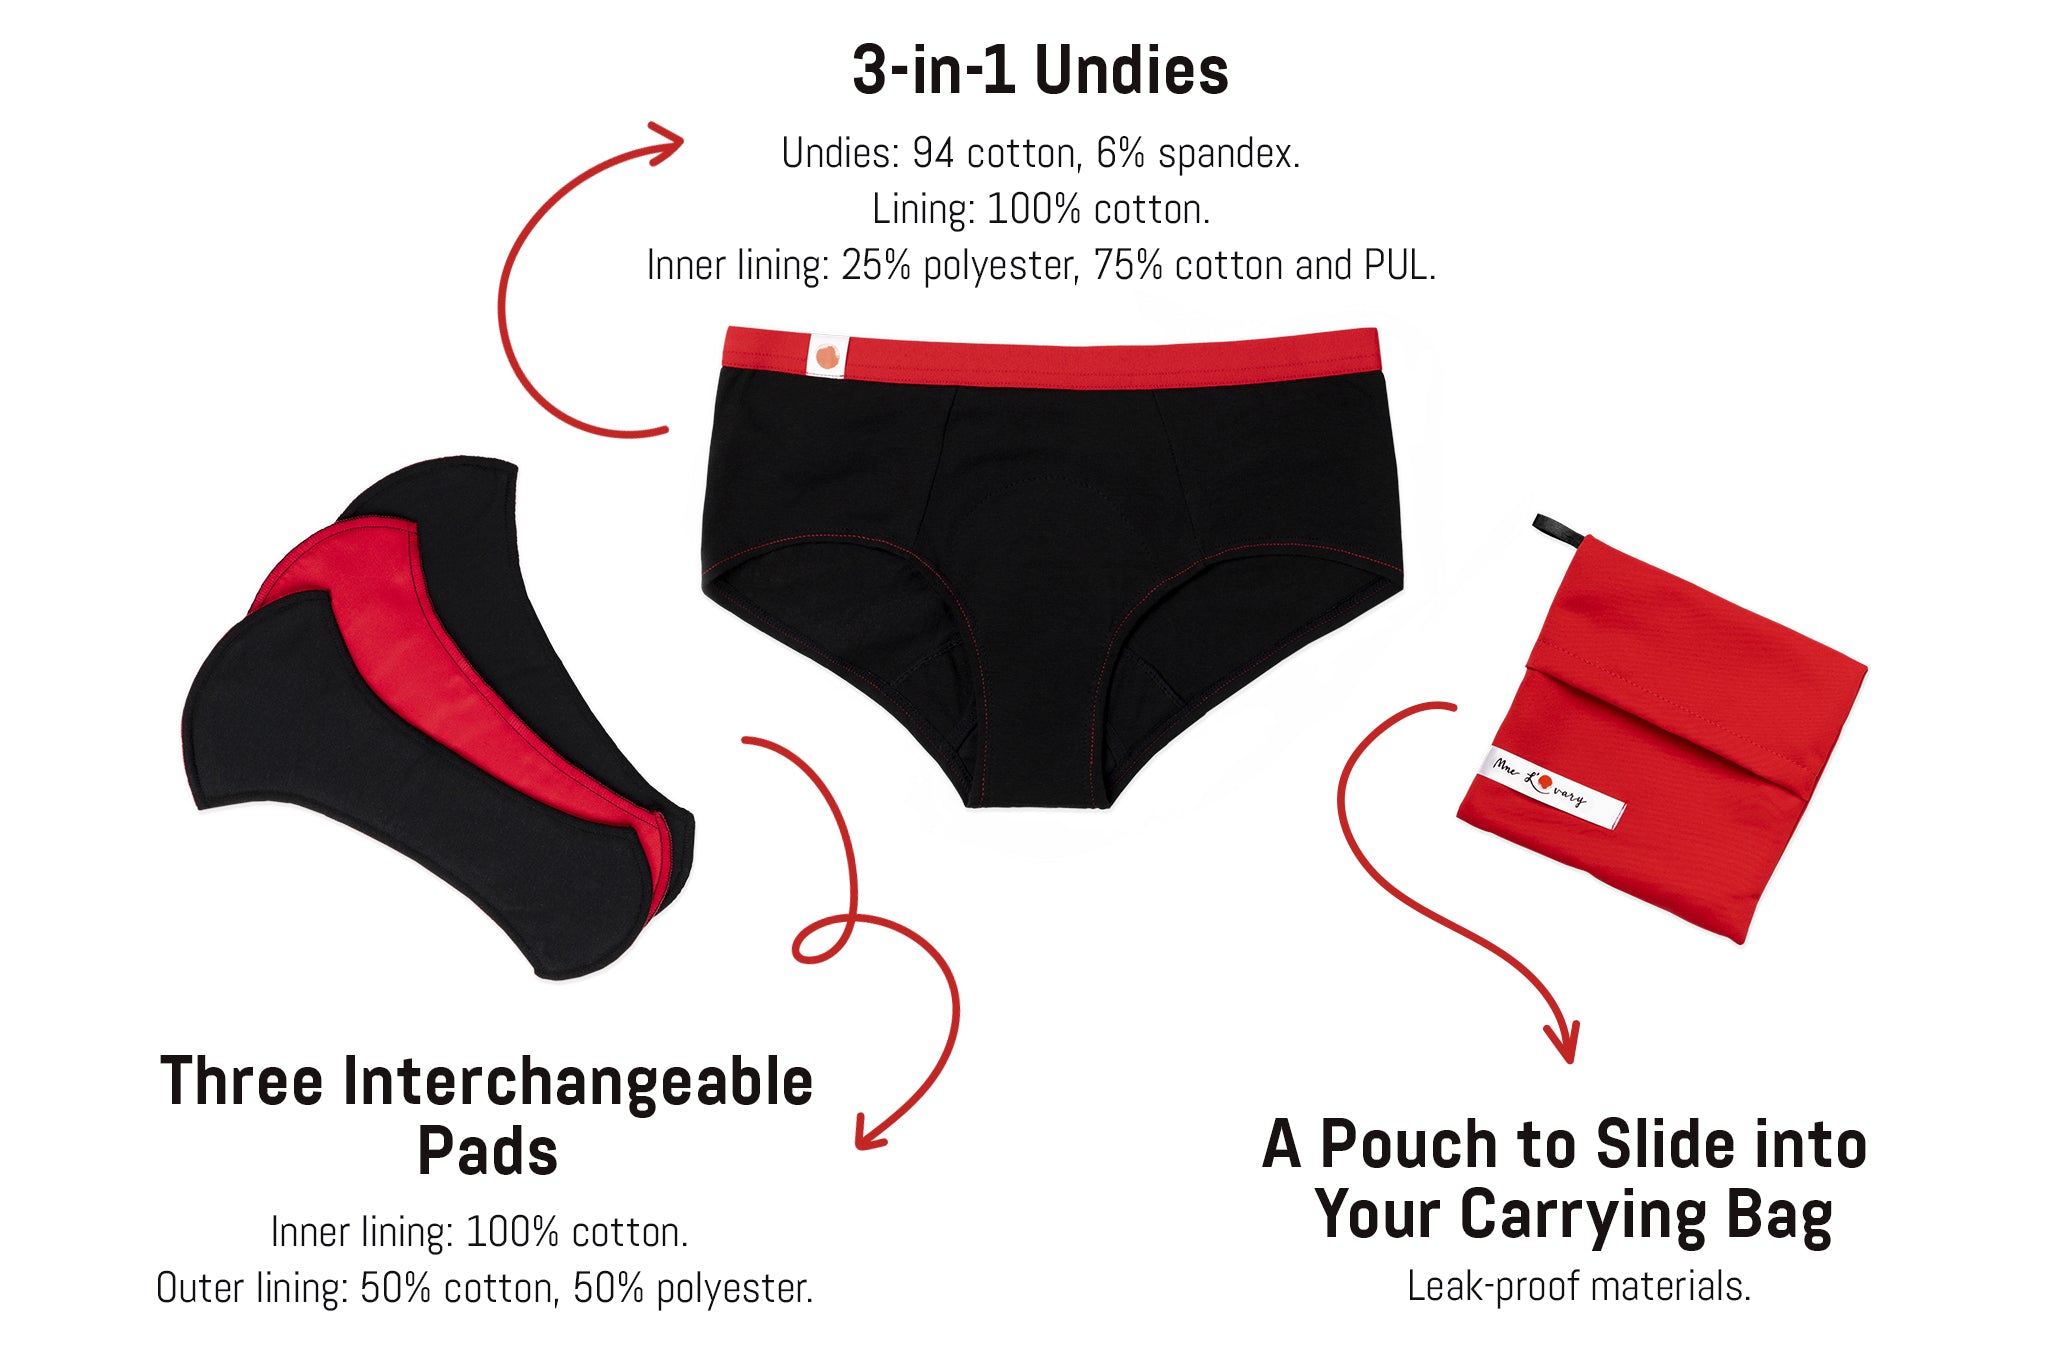 PFAS in period underwear: The Thinx scandal – Mme L'Ovary